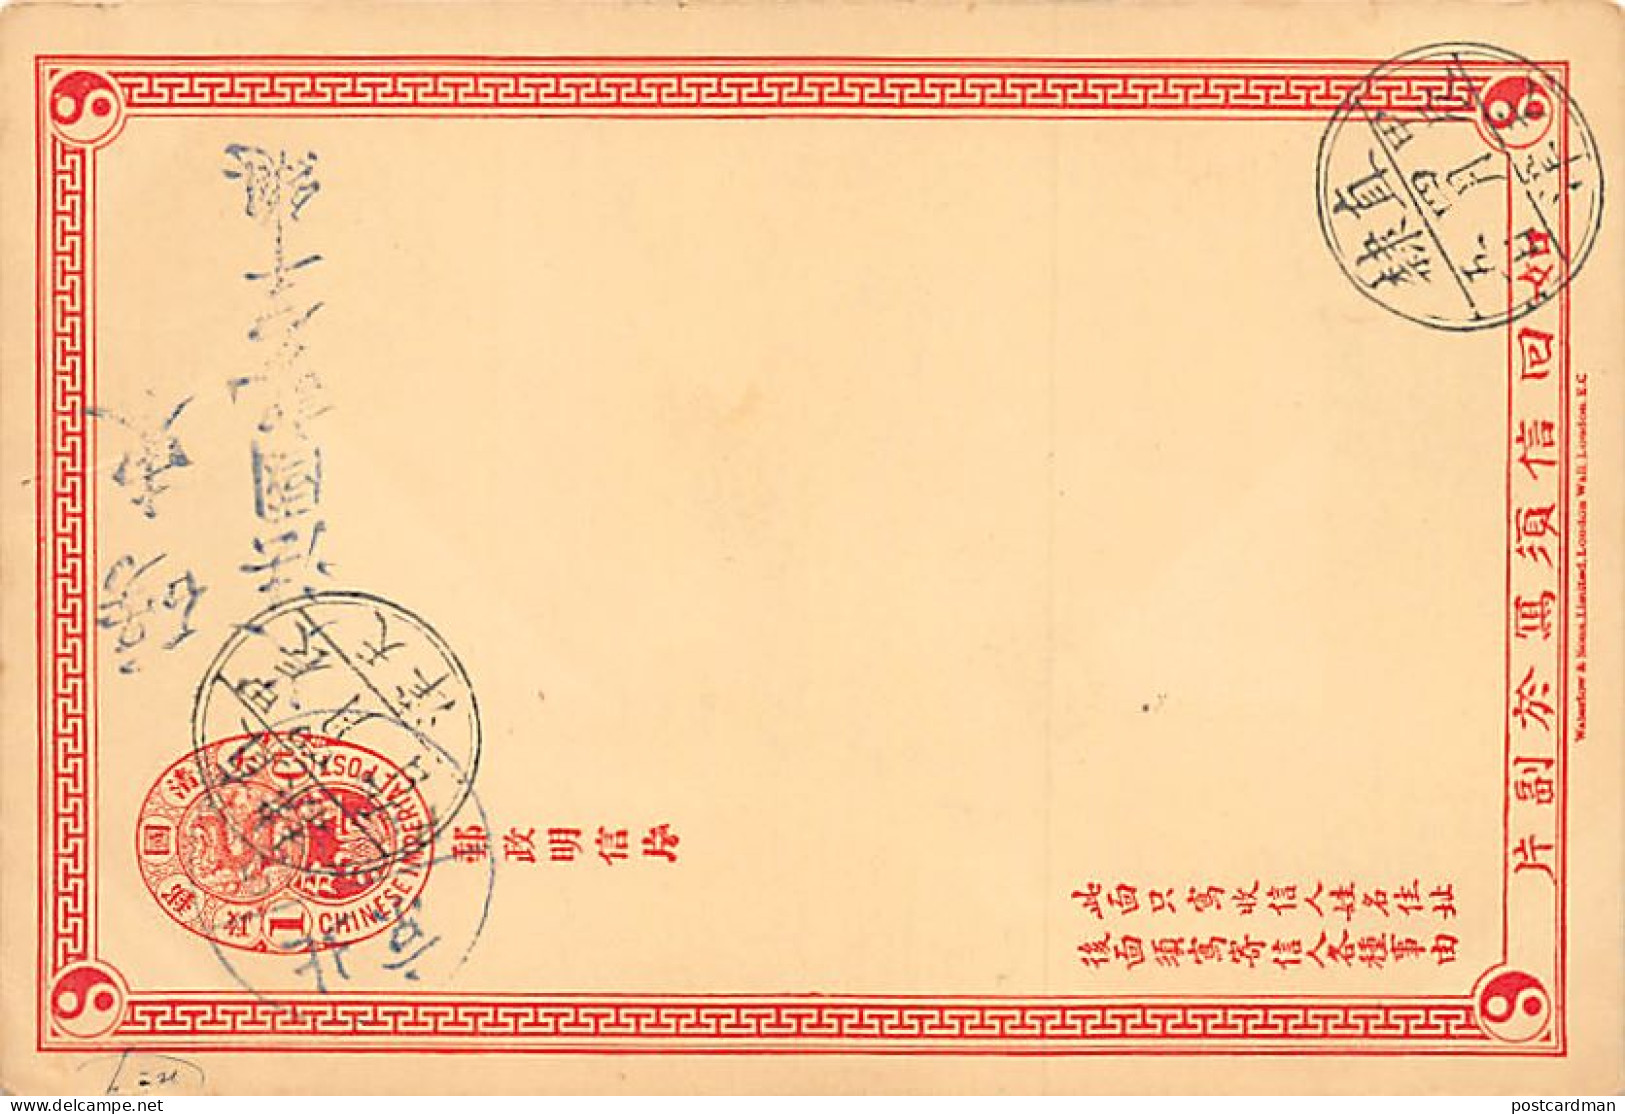 China - Chinese Ladies - Welcoming Guests - HANDPAINTED POSTCARD - Publ. Postal Stationery Chinese Imperial Post  1 Cent - Chine